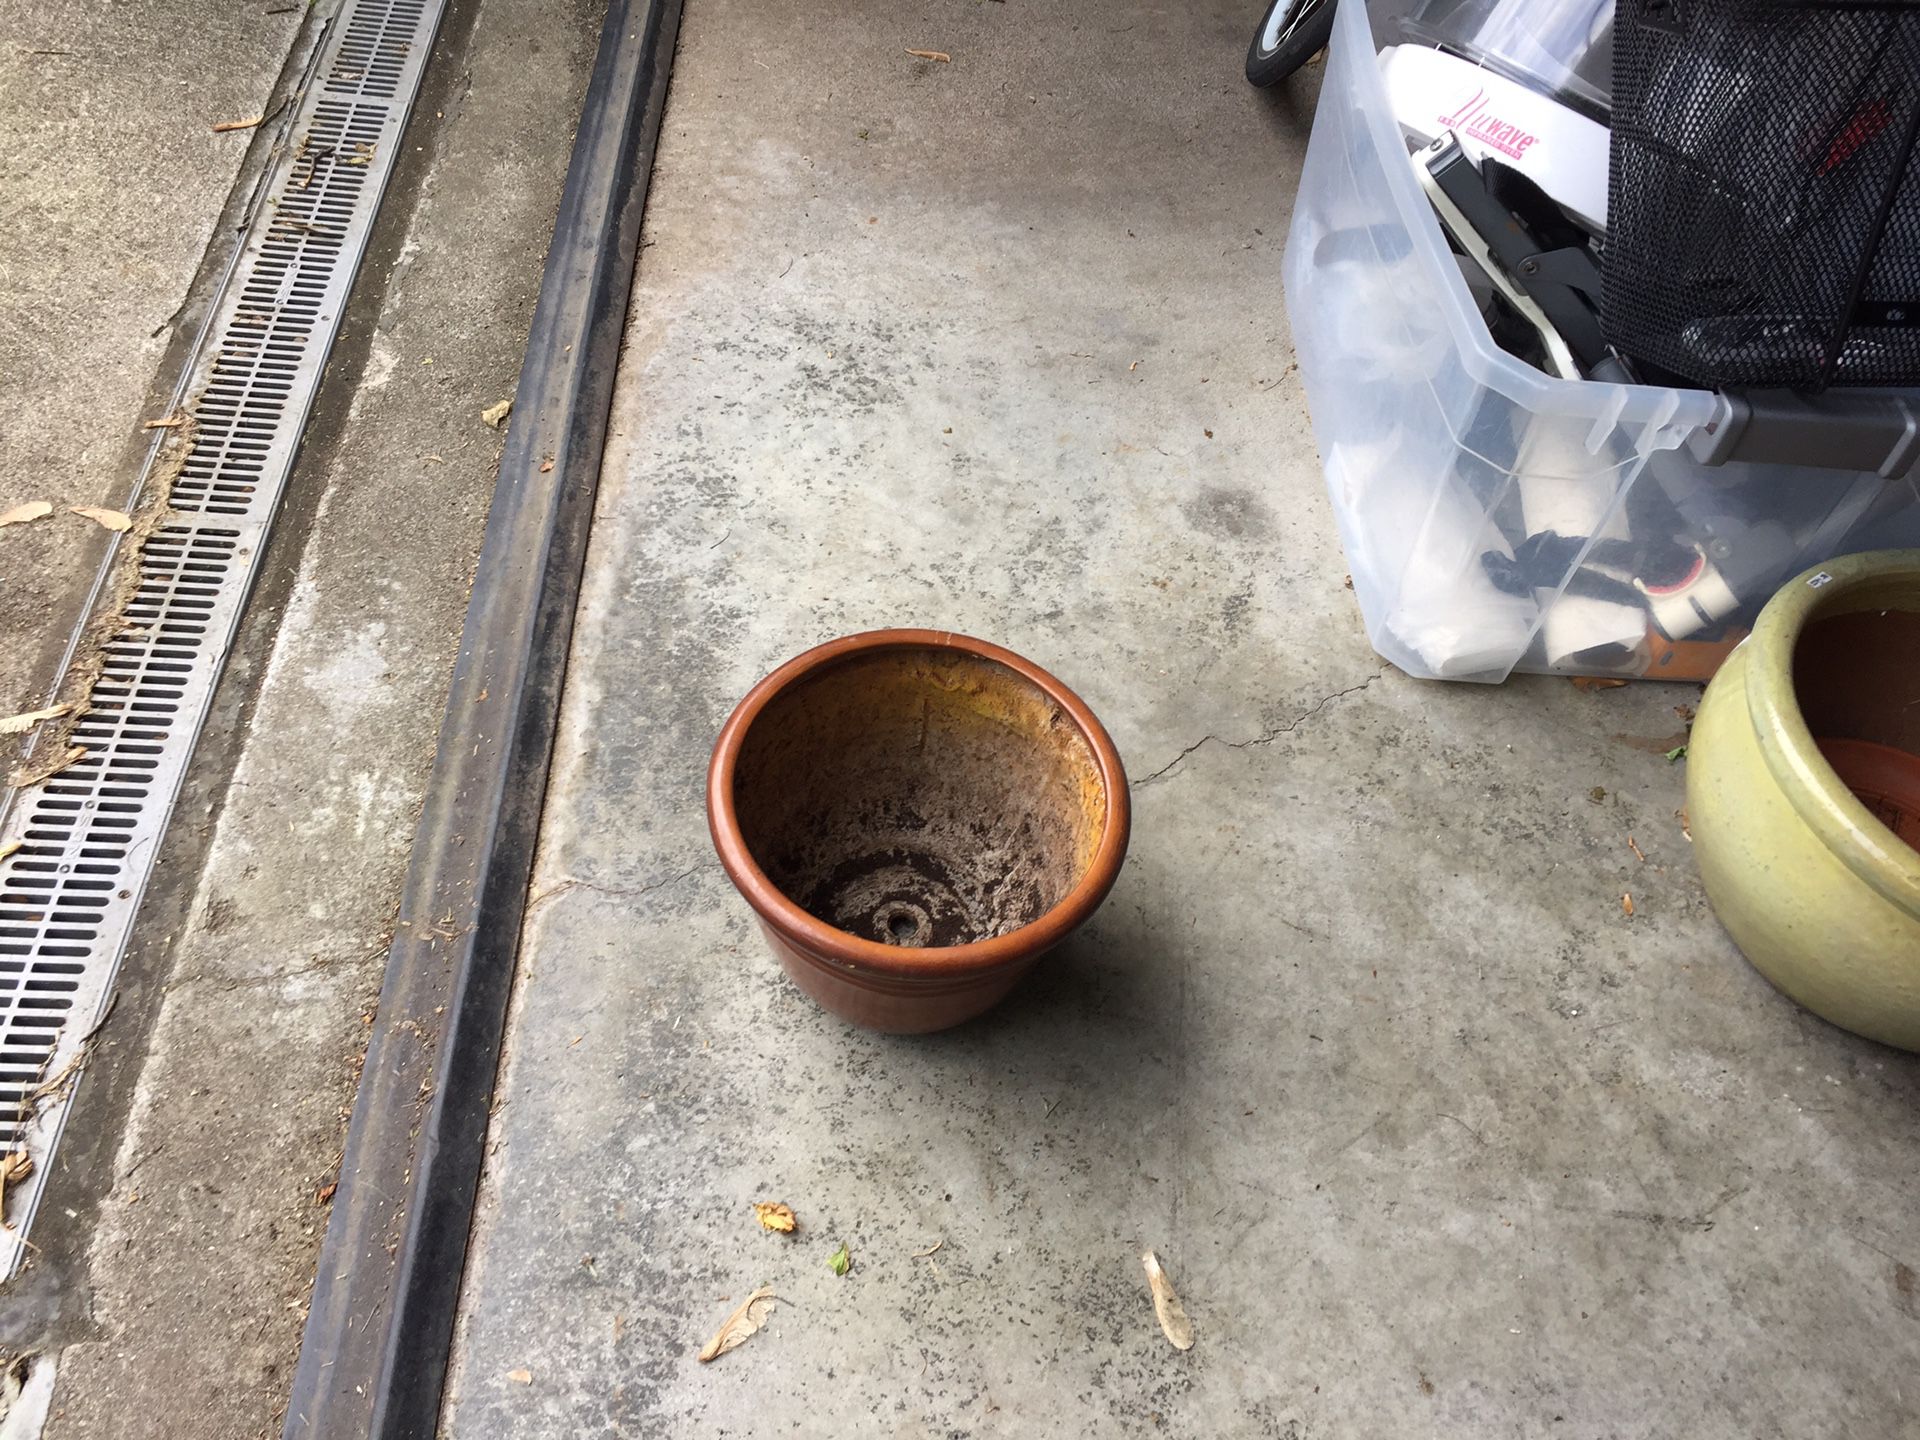 Flower pot used in good condition. Asking $15 and negotiable.